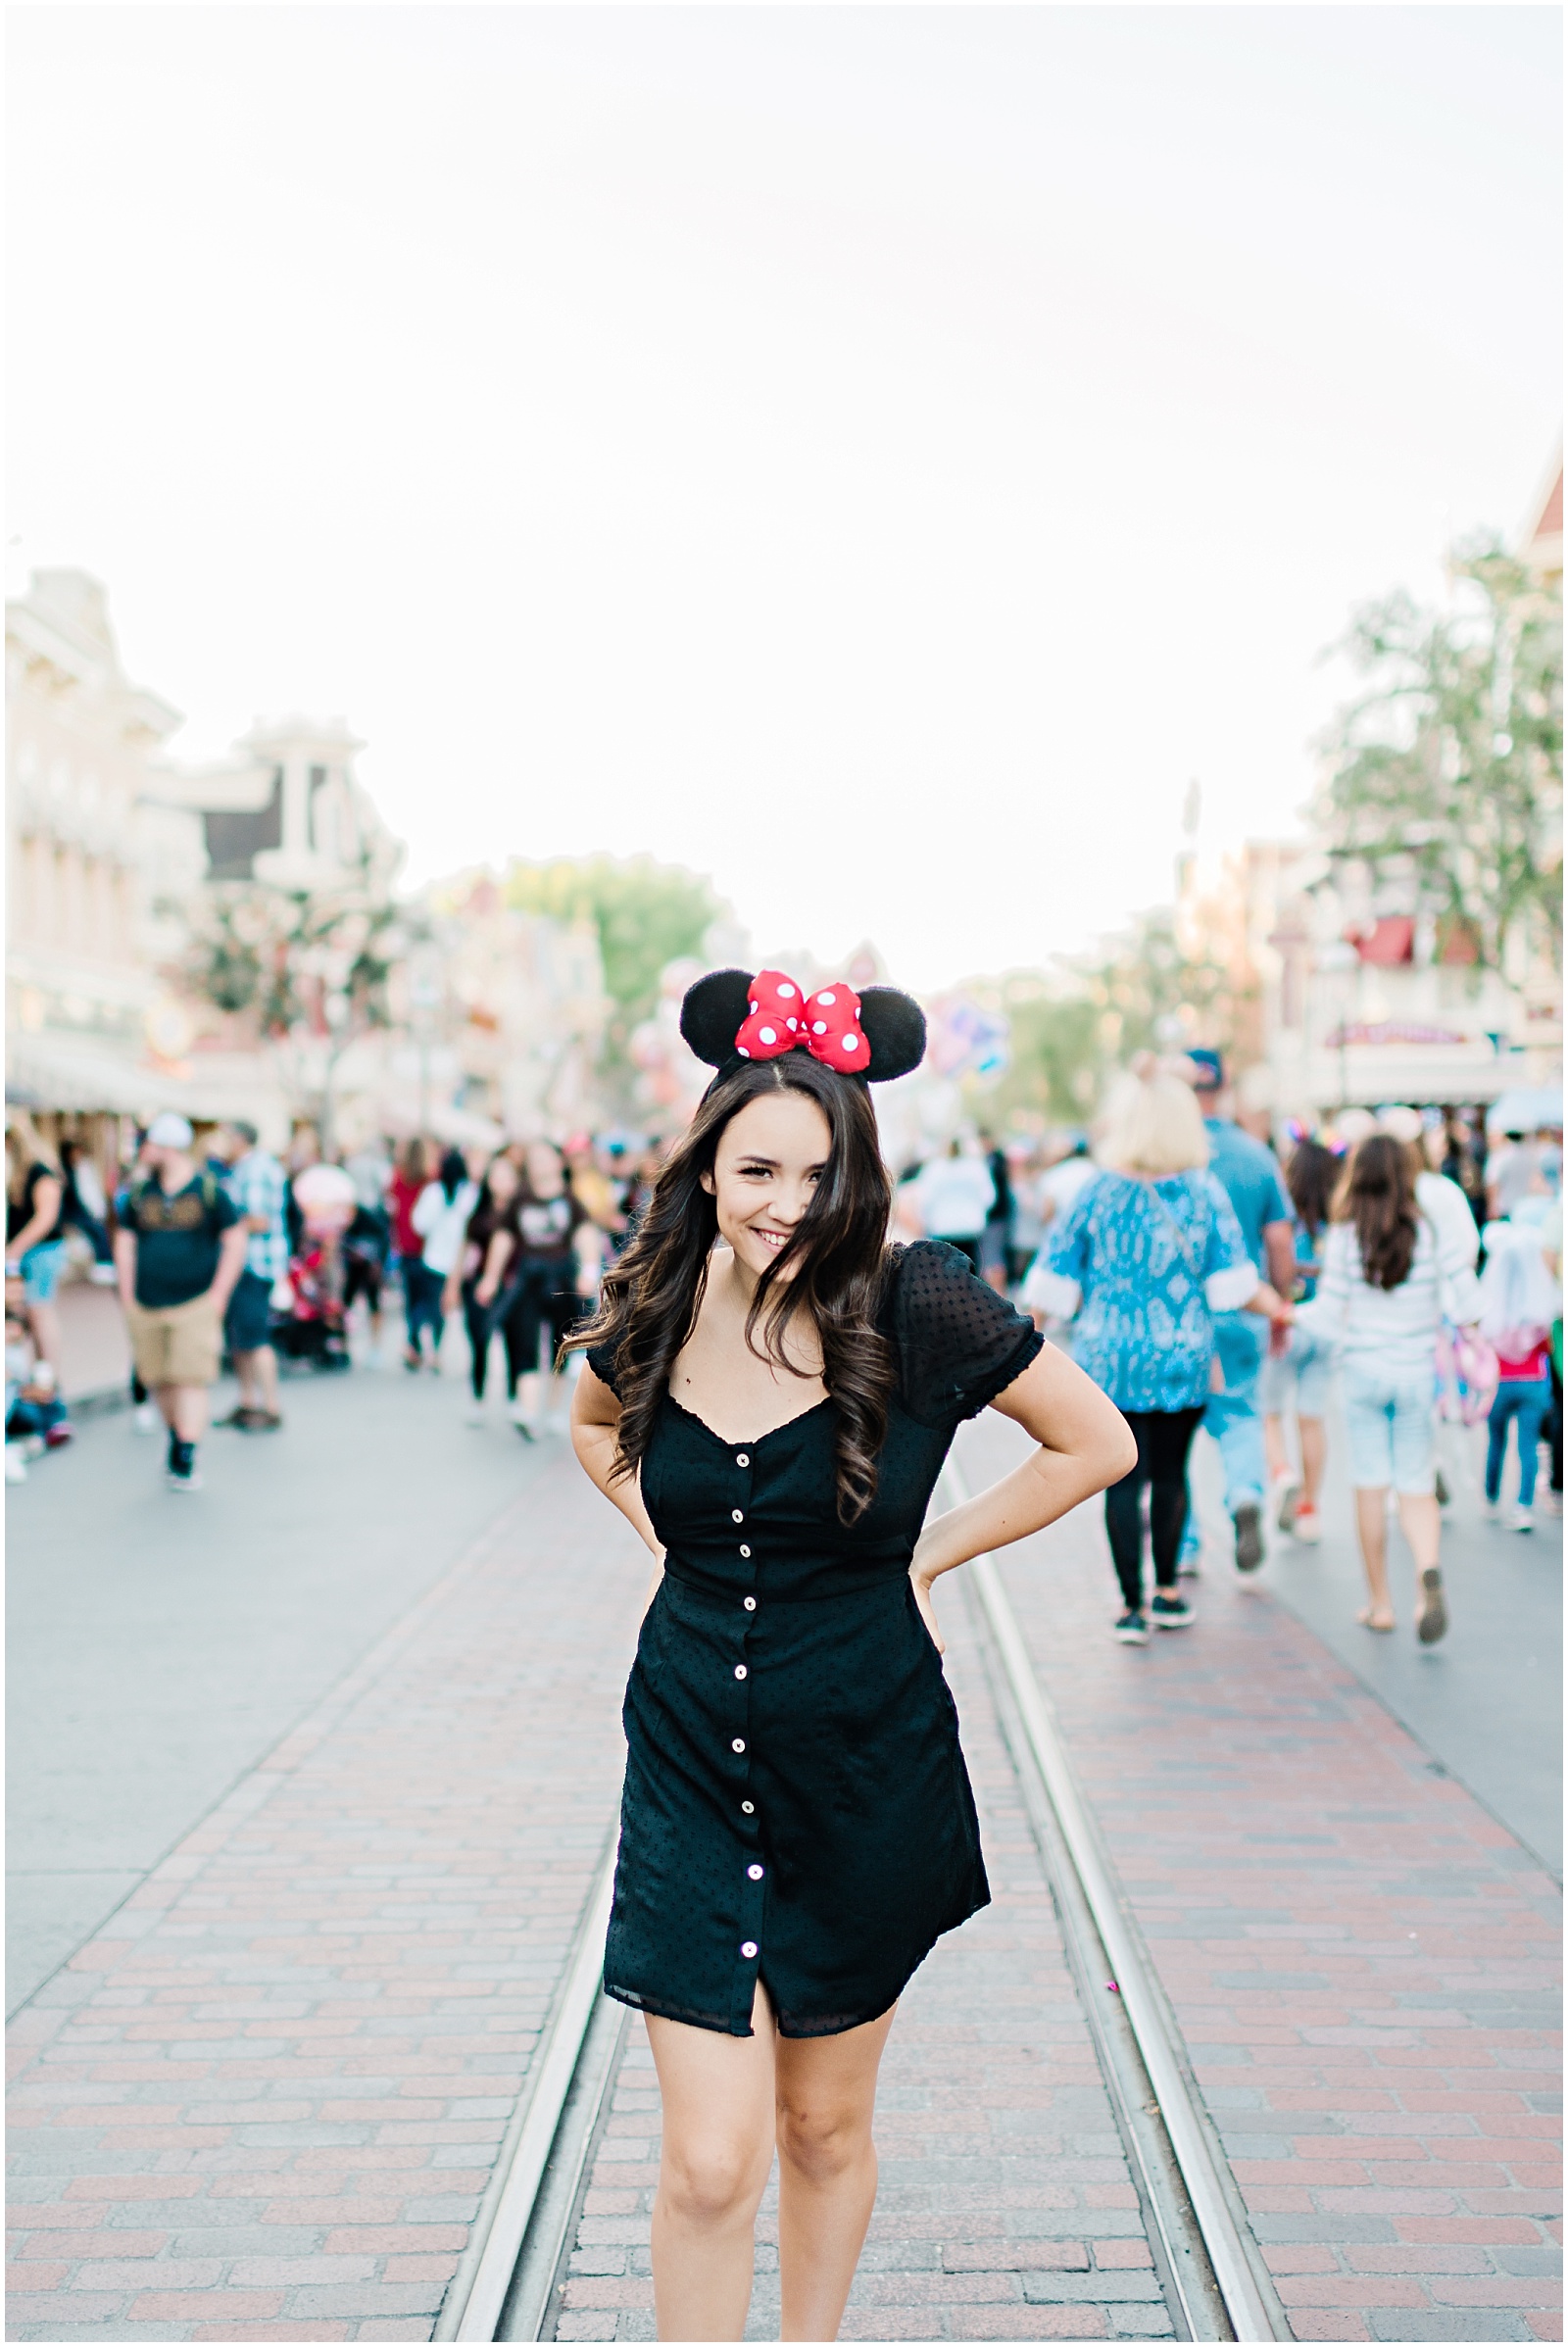 Disneyland Main Street Senior Session. Images by Mollie Jane Photography. To see more go to www.molliejanephotography.com.